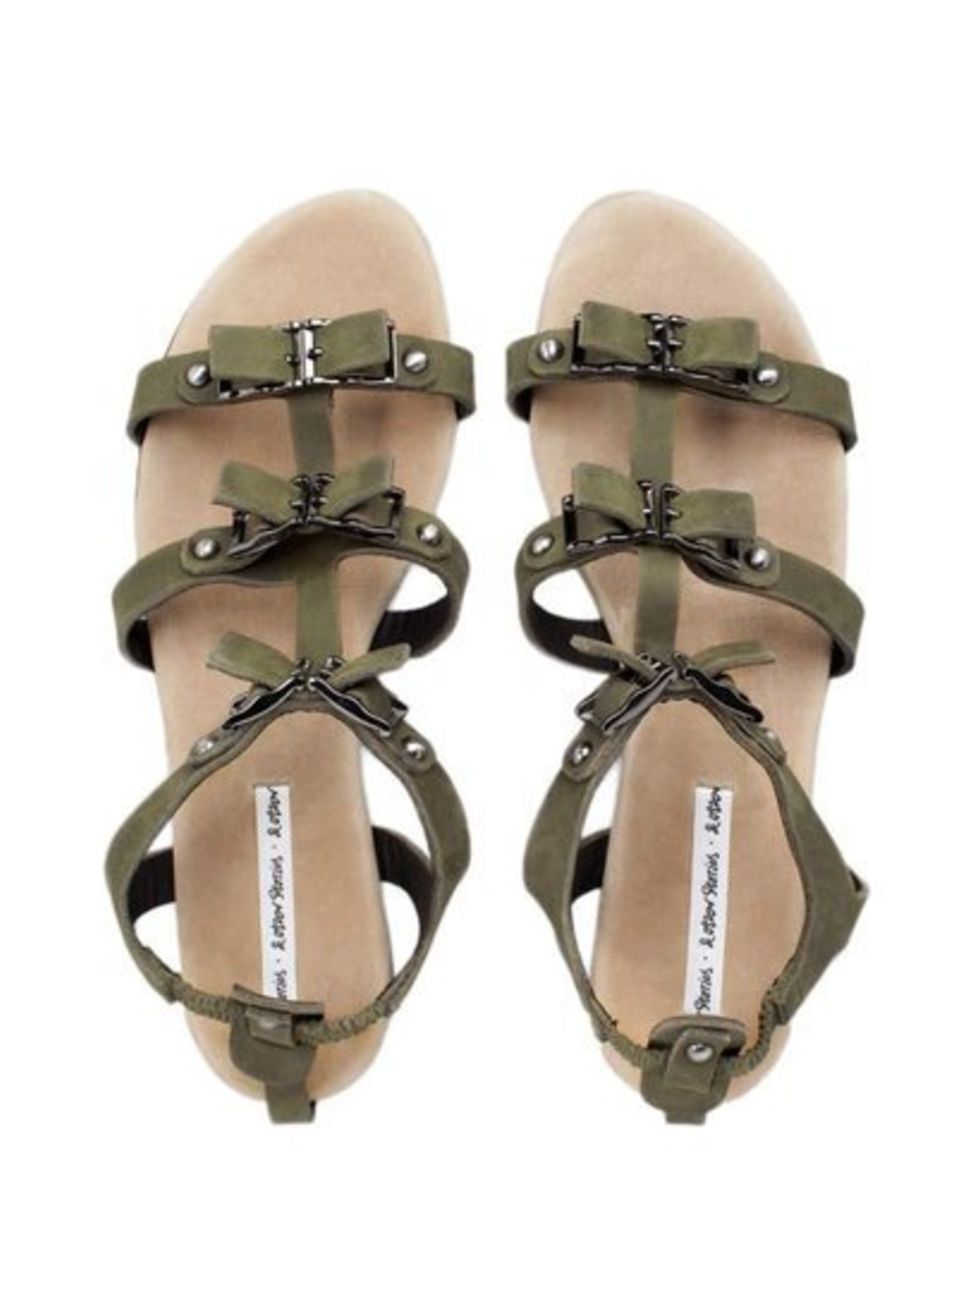 Follow Market & Retail Editor Harriet Stewart's lead and pair these utilitarian sandals with delicate lace for an unexpected contrast.

& Other Stories sandals, £69